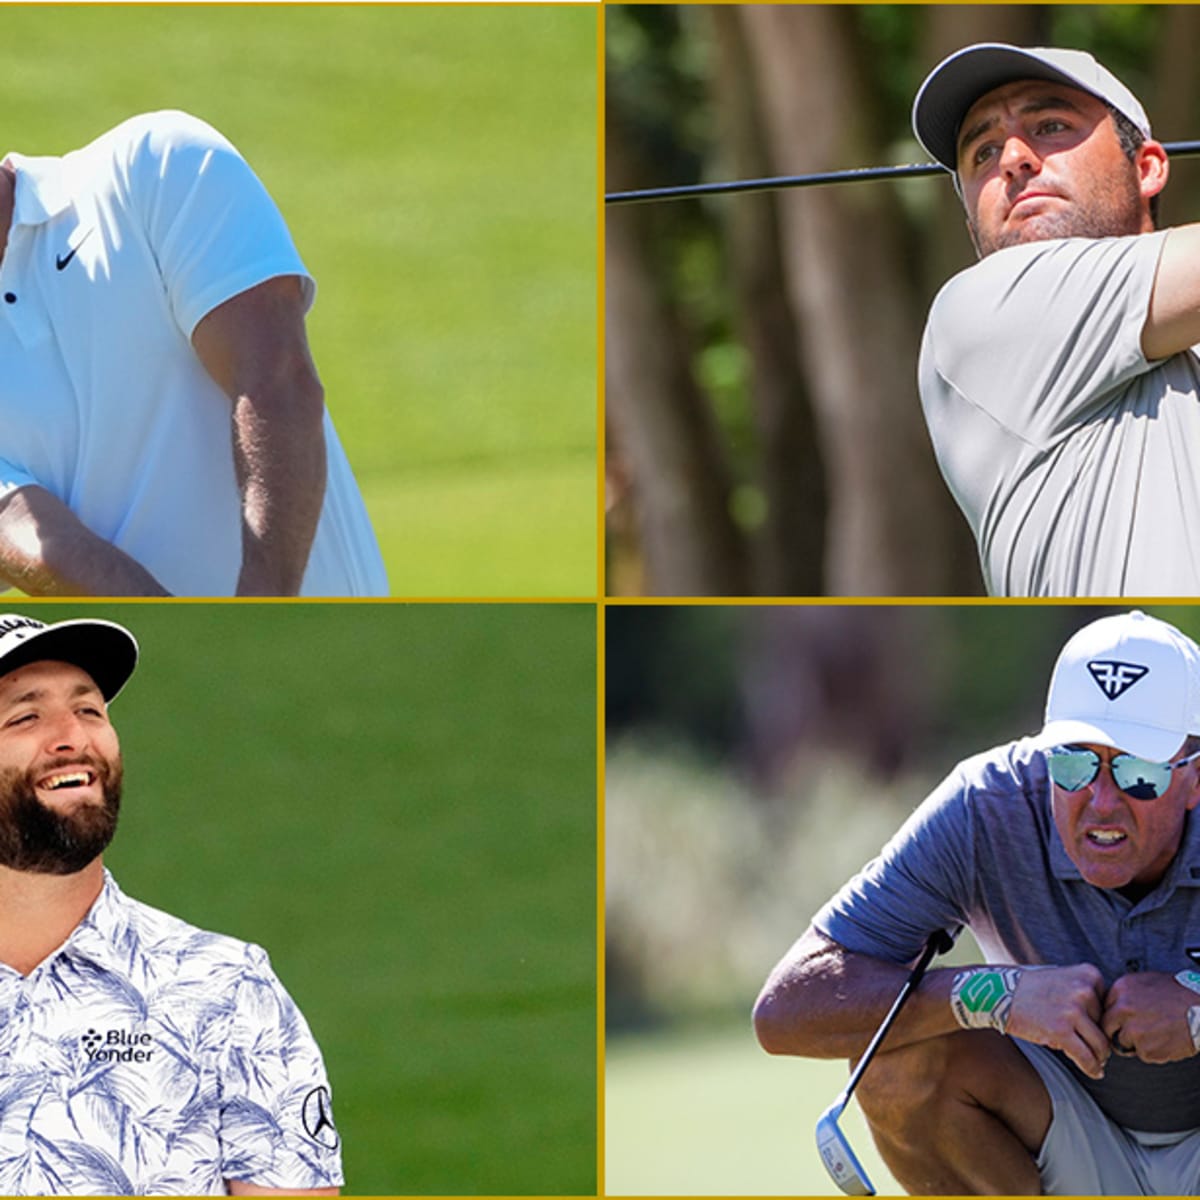 PGA Championship - Pick your 3 favorites out of these PGA